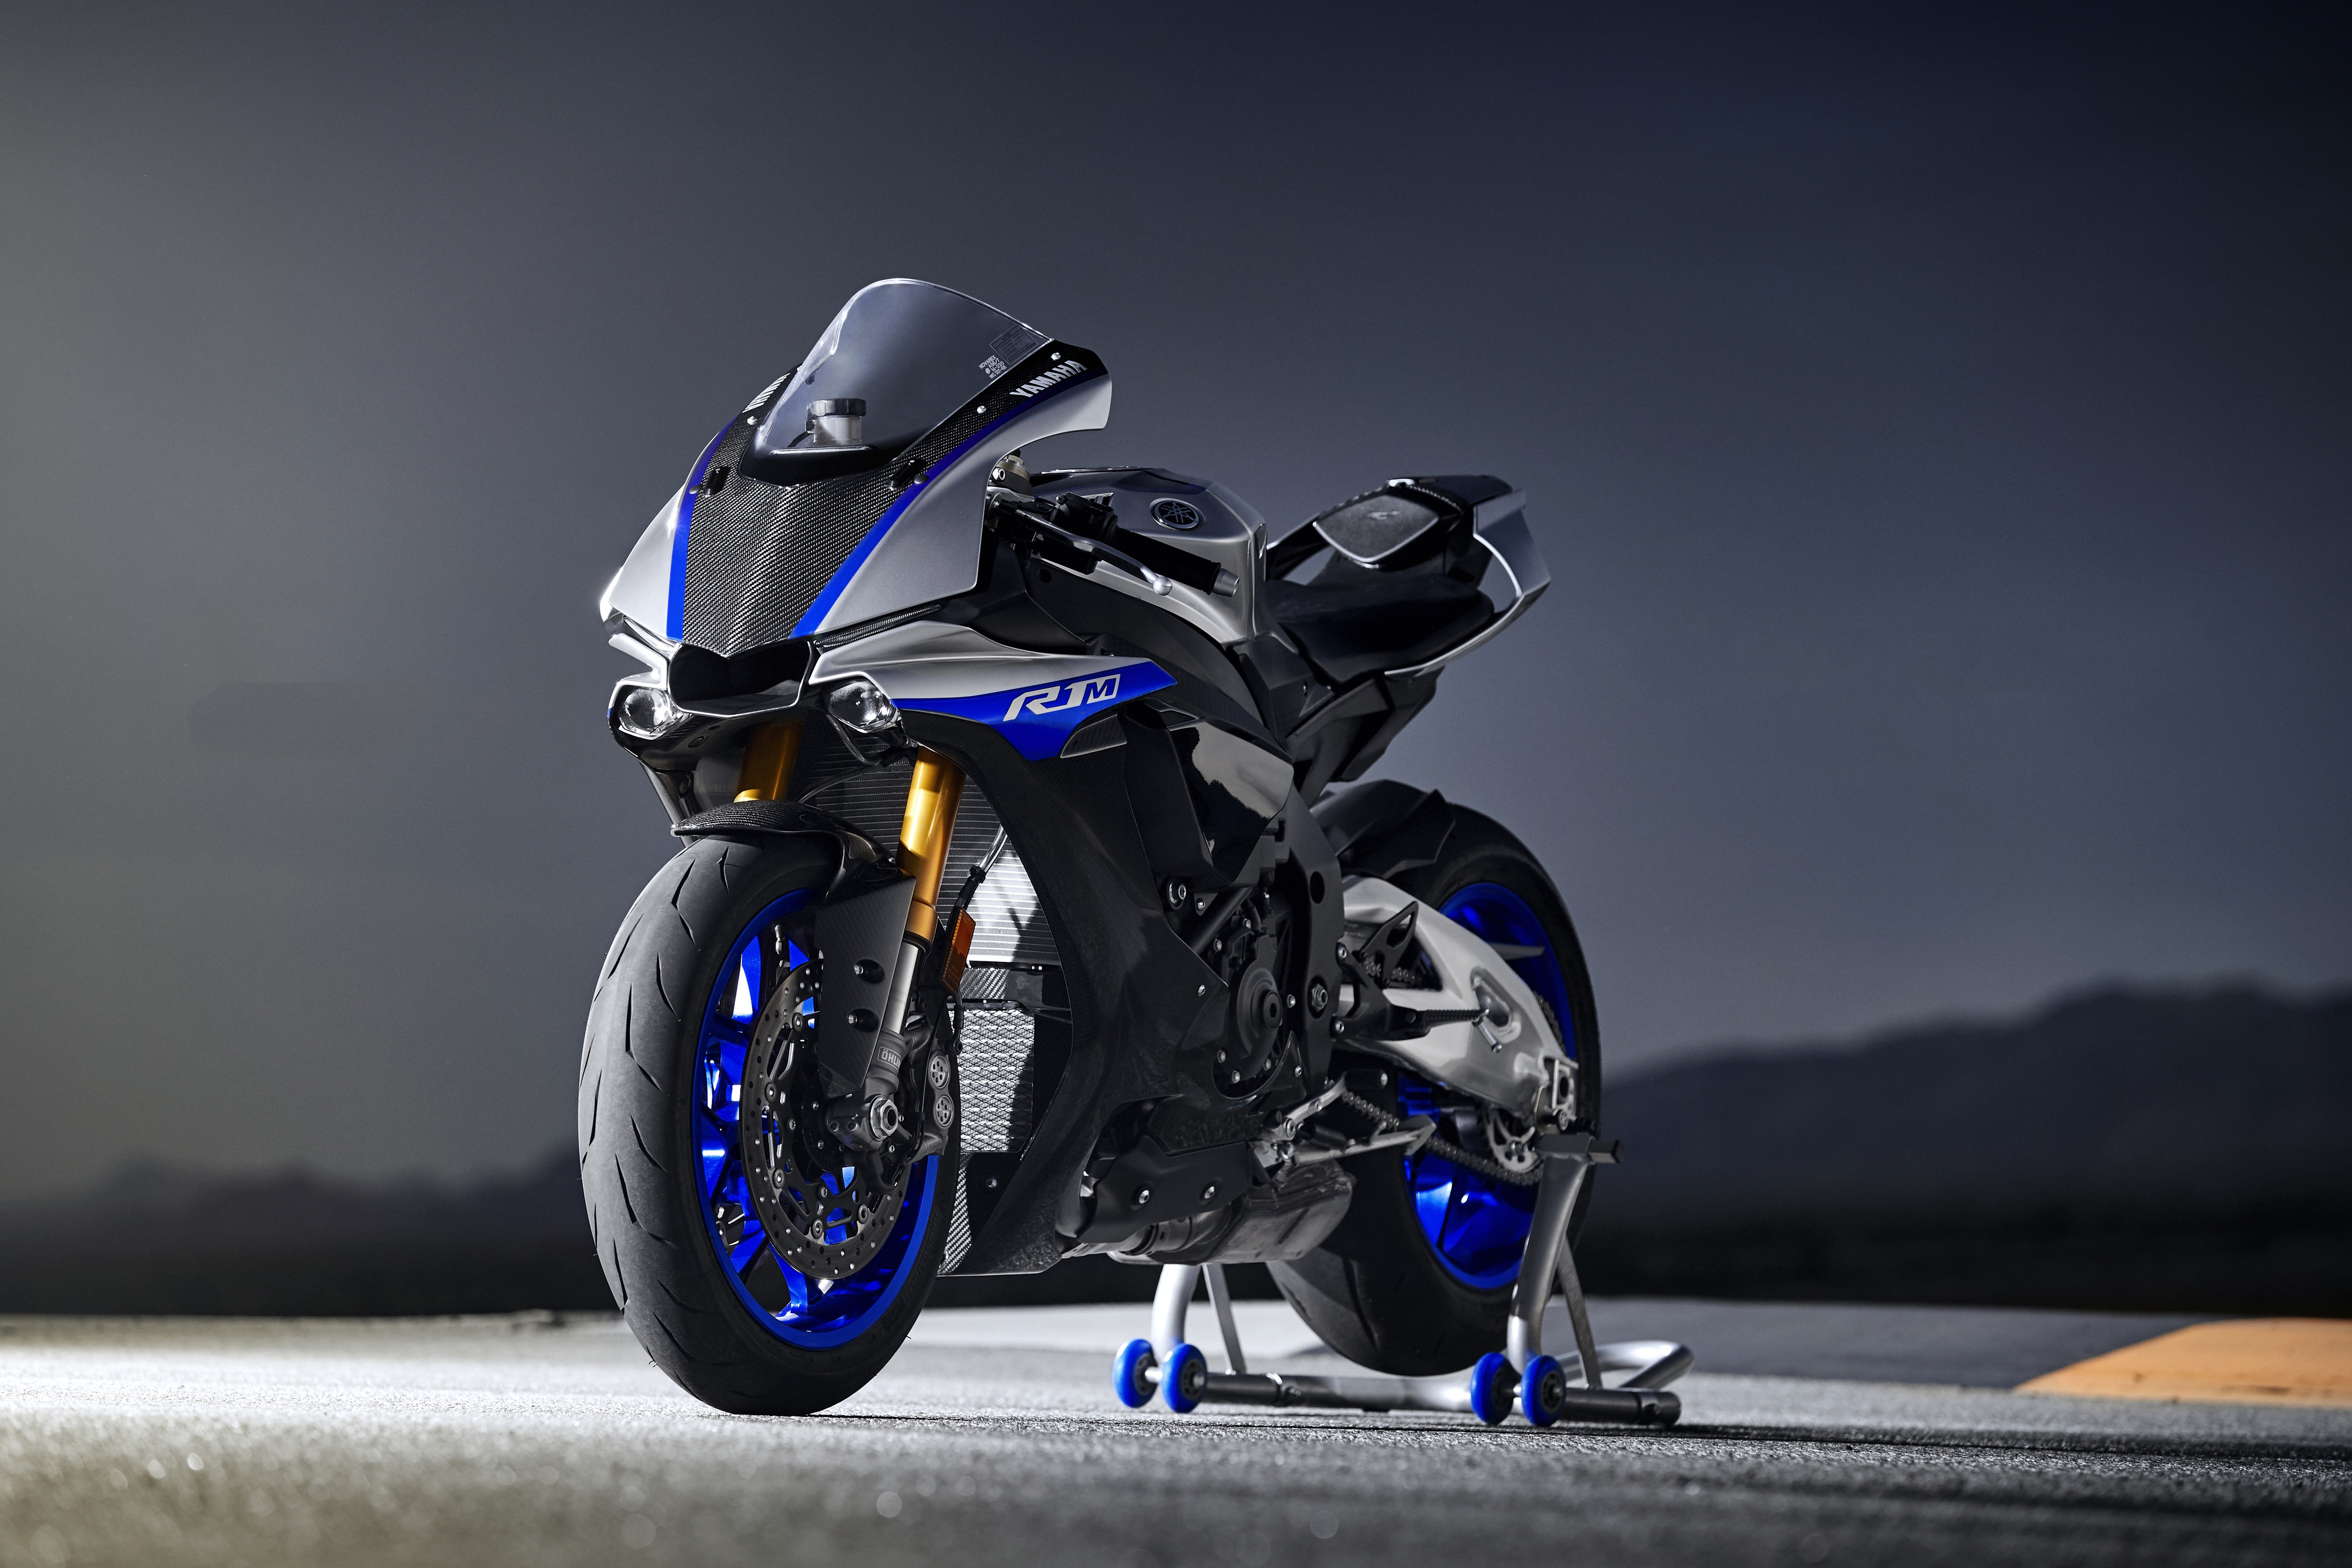 Wallpapers Yamaha R1 motorcycles track on the desktop